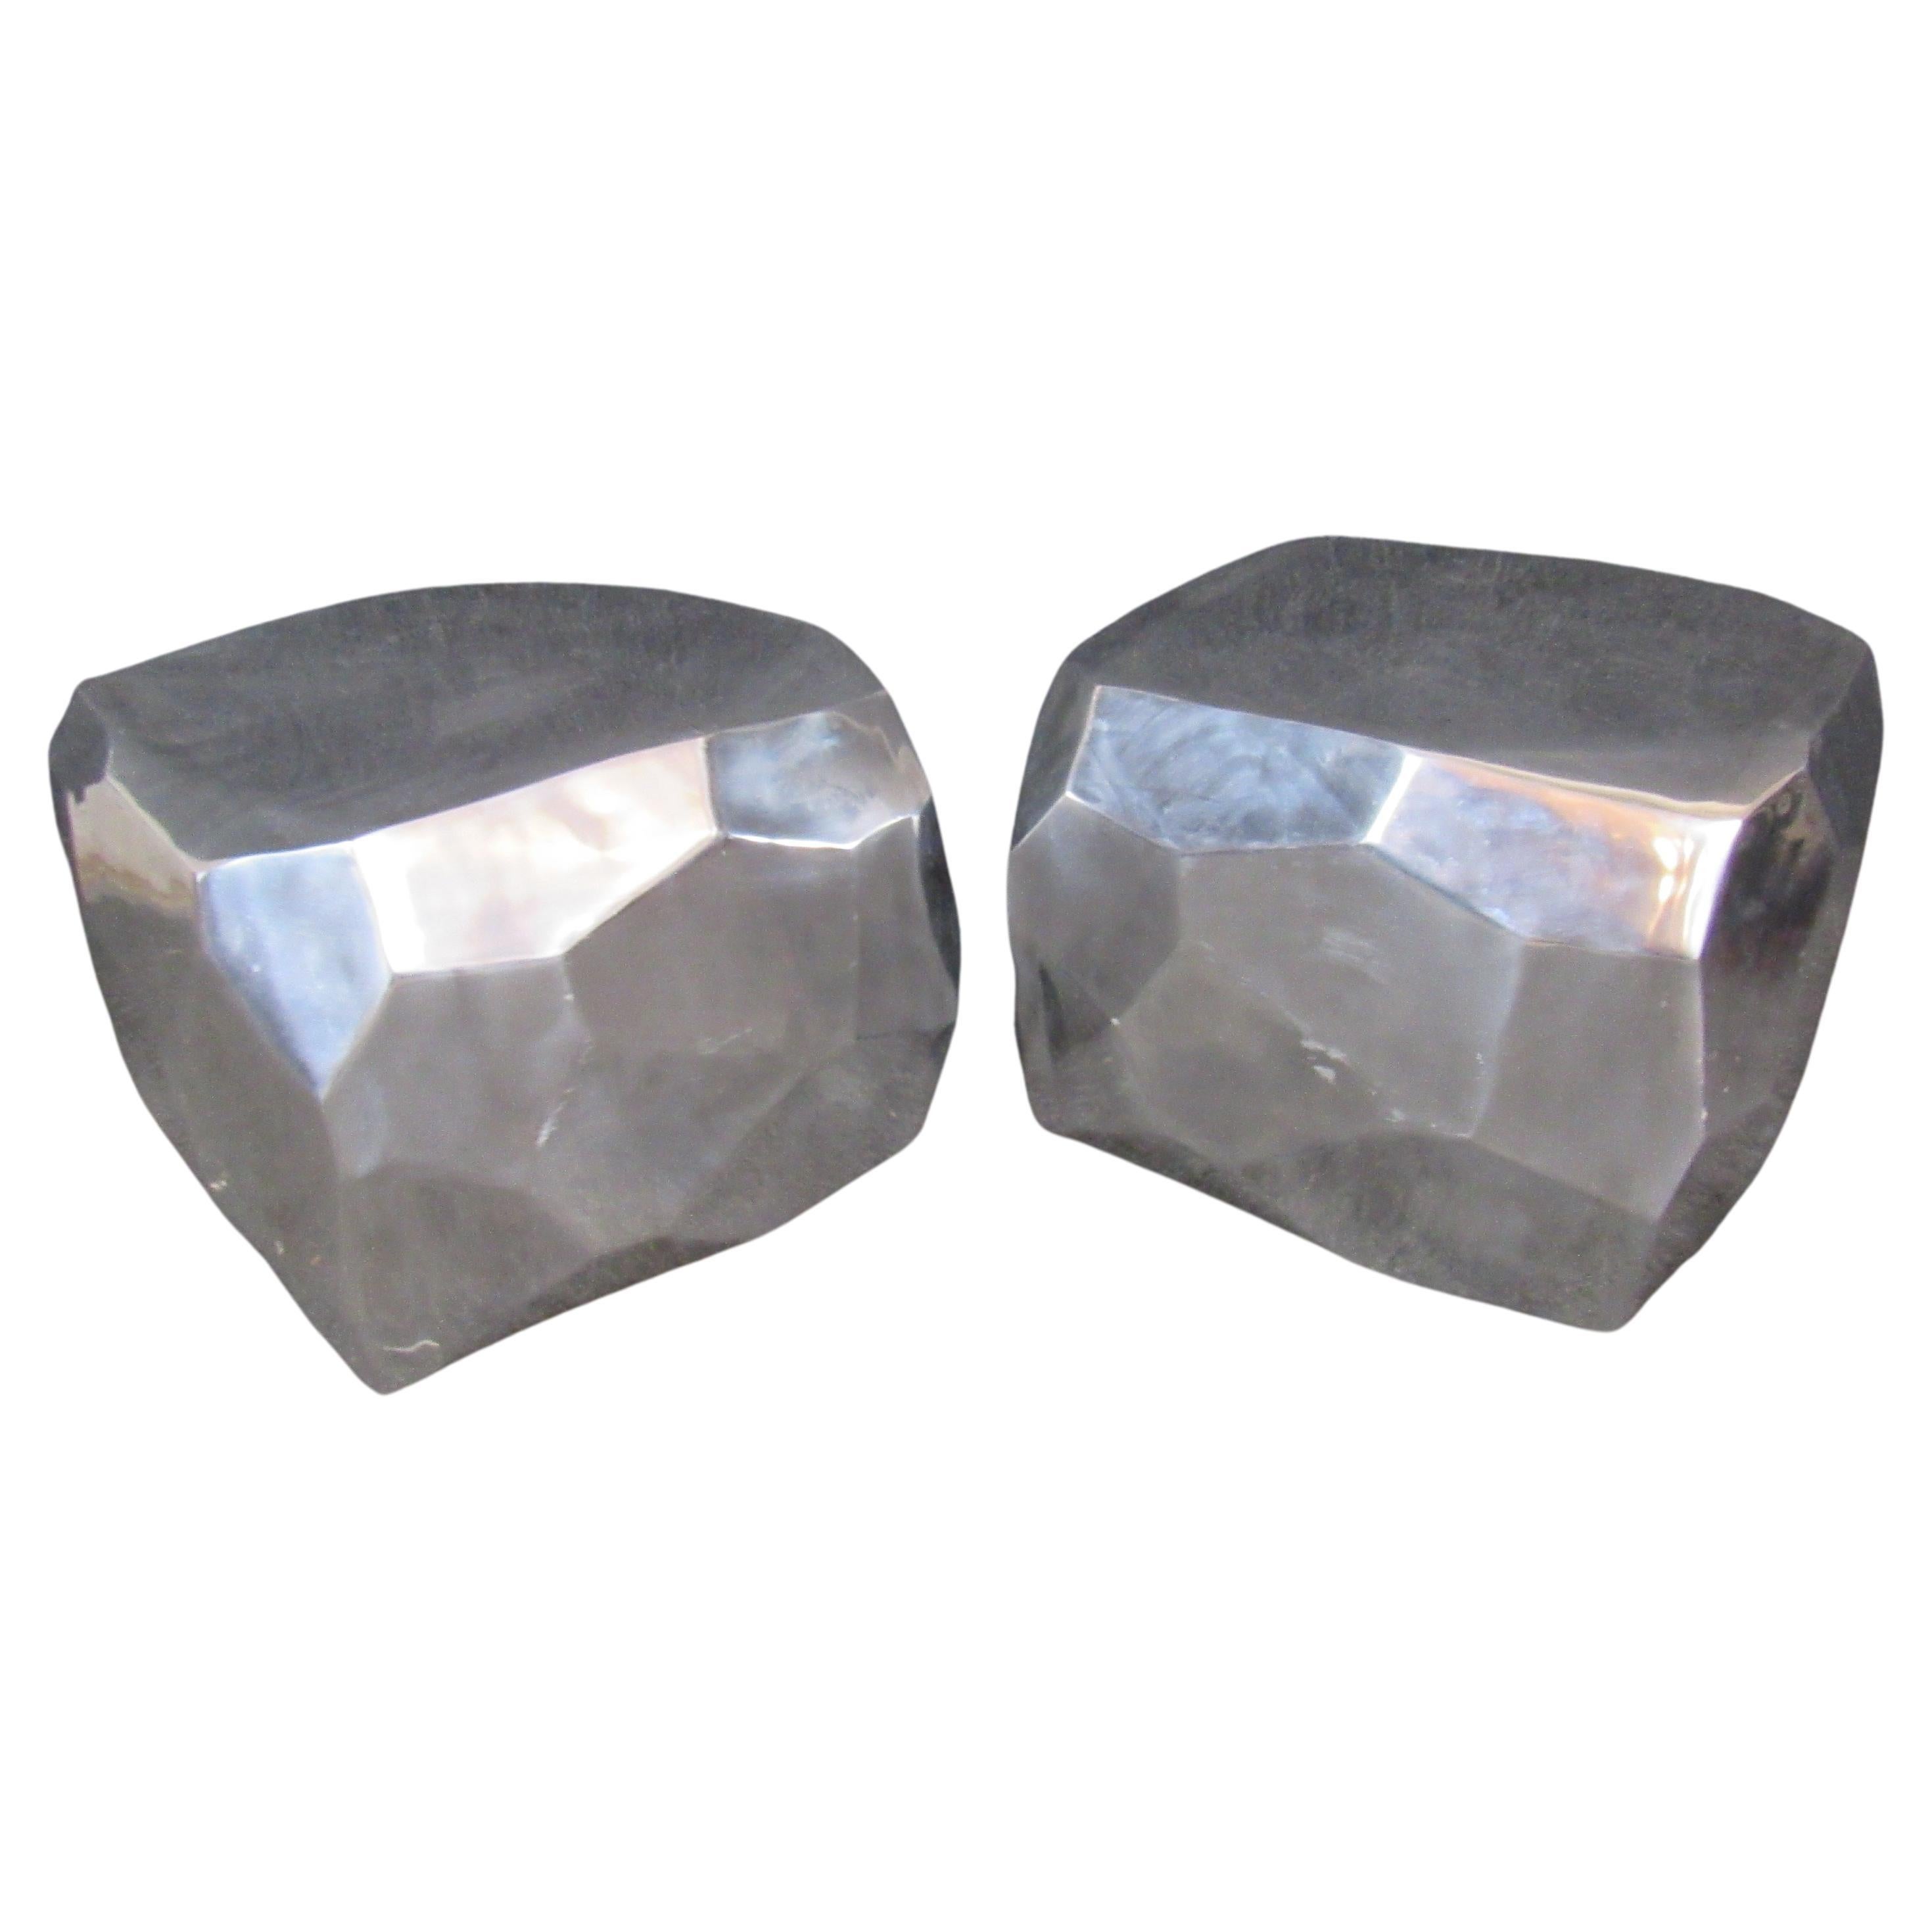 Pair of Aluminum Tables in the Shape of Rocks